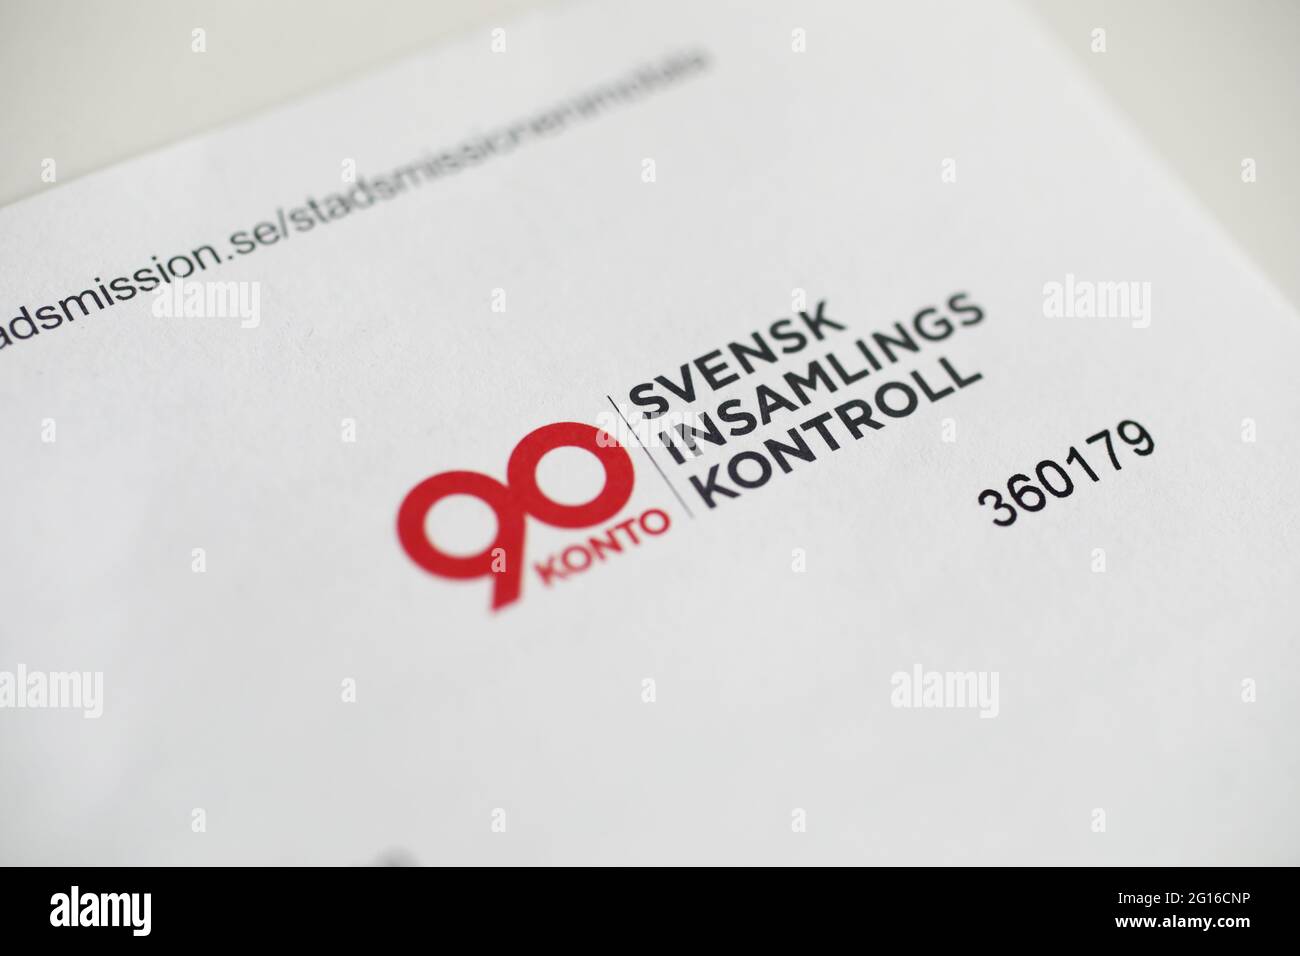 Mail from Linköping Stadsmission to donate a gift. Here with the text '90-account Swedish fundraising control'. Stock Photo